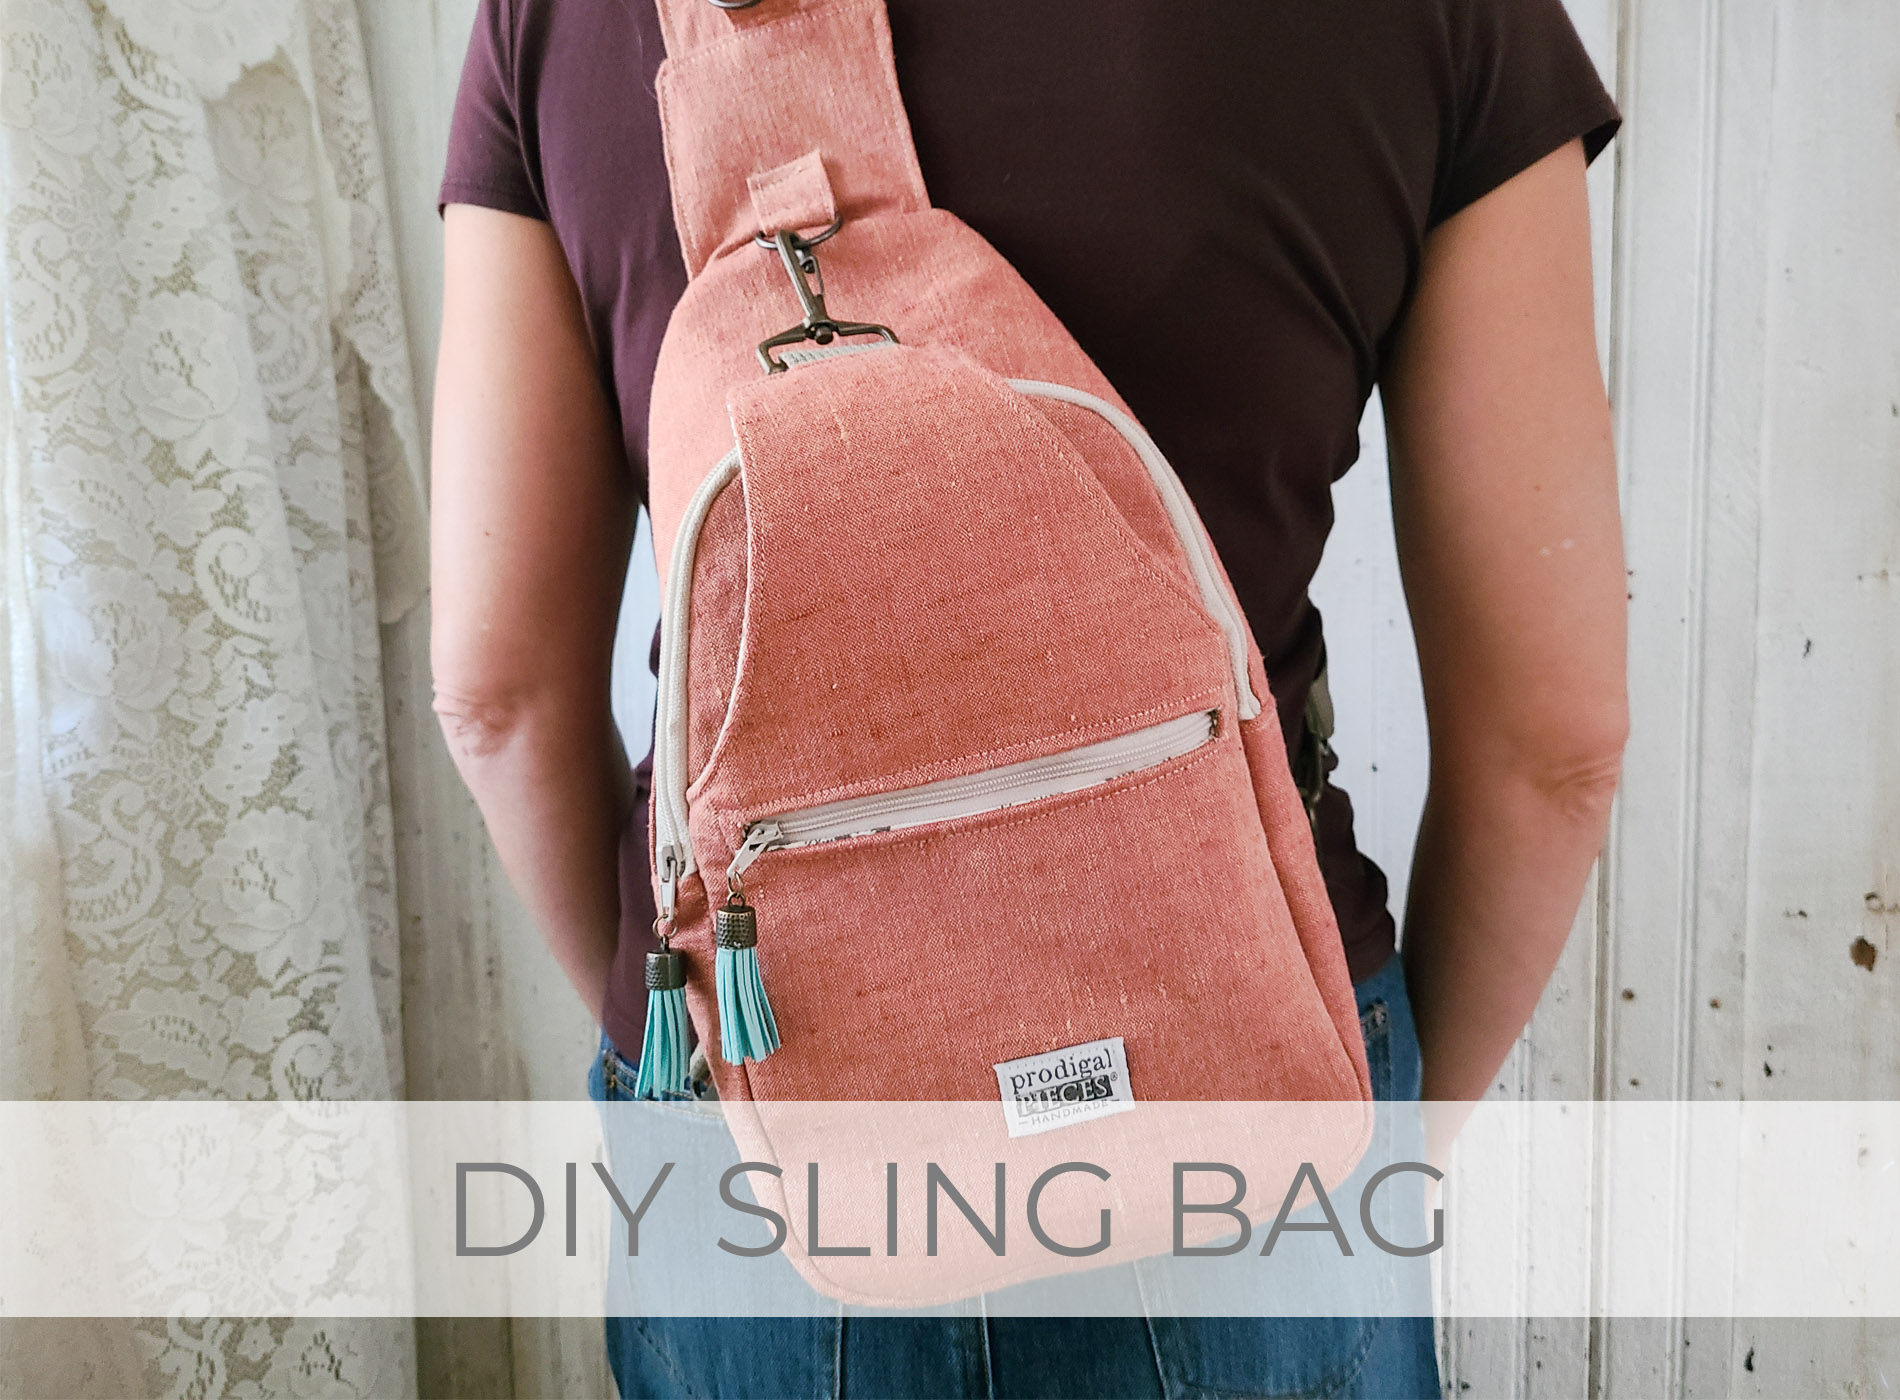 DIY Sling Bag from Refashioned Shirt by Larissa of Prodigal Pieces | prodigalpieces.com #prodigalpieces